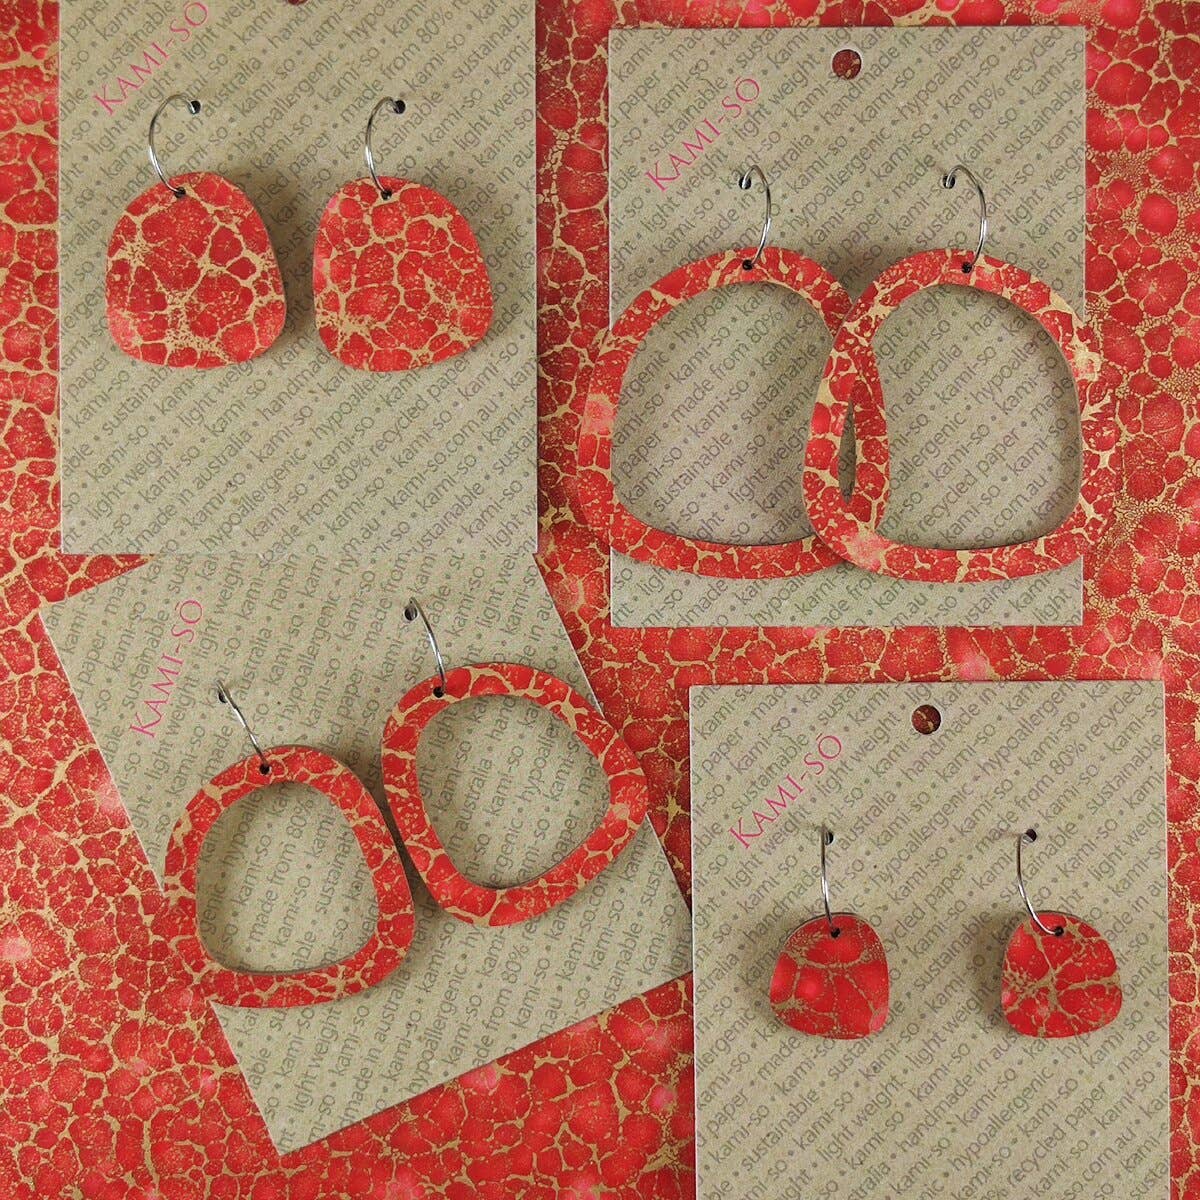 KAMI-SO- Square Recycled Paper Earrings - Red & Gold Crackle: Small Hoop